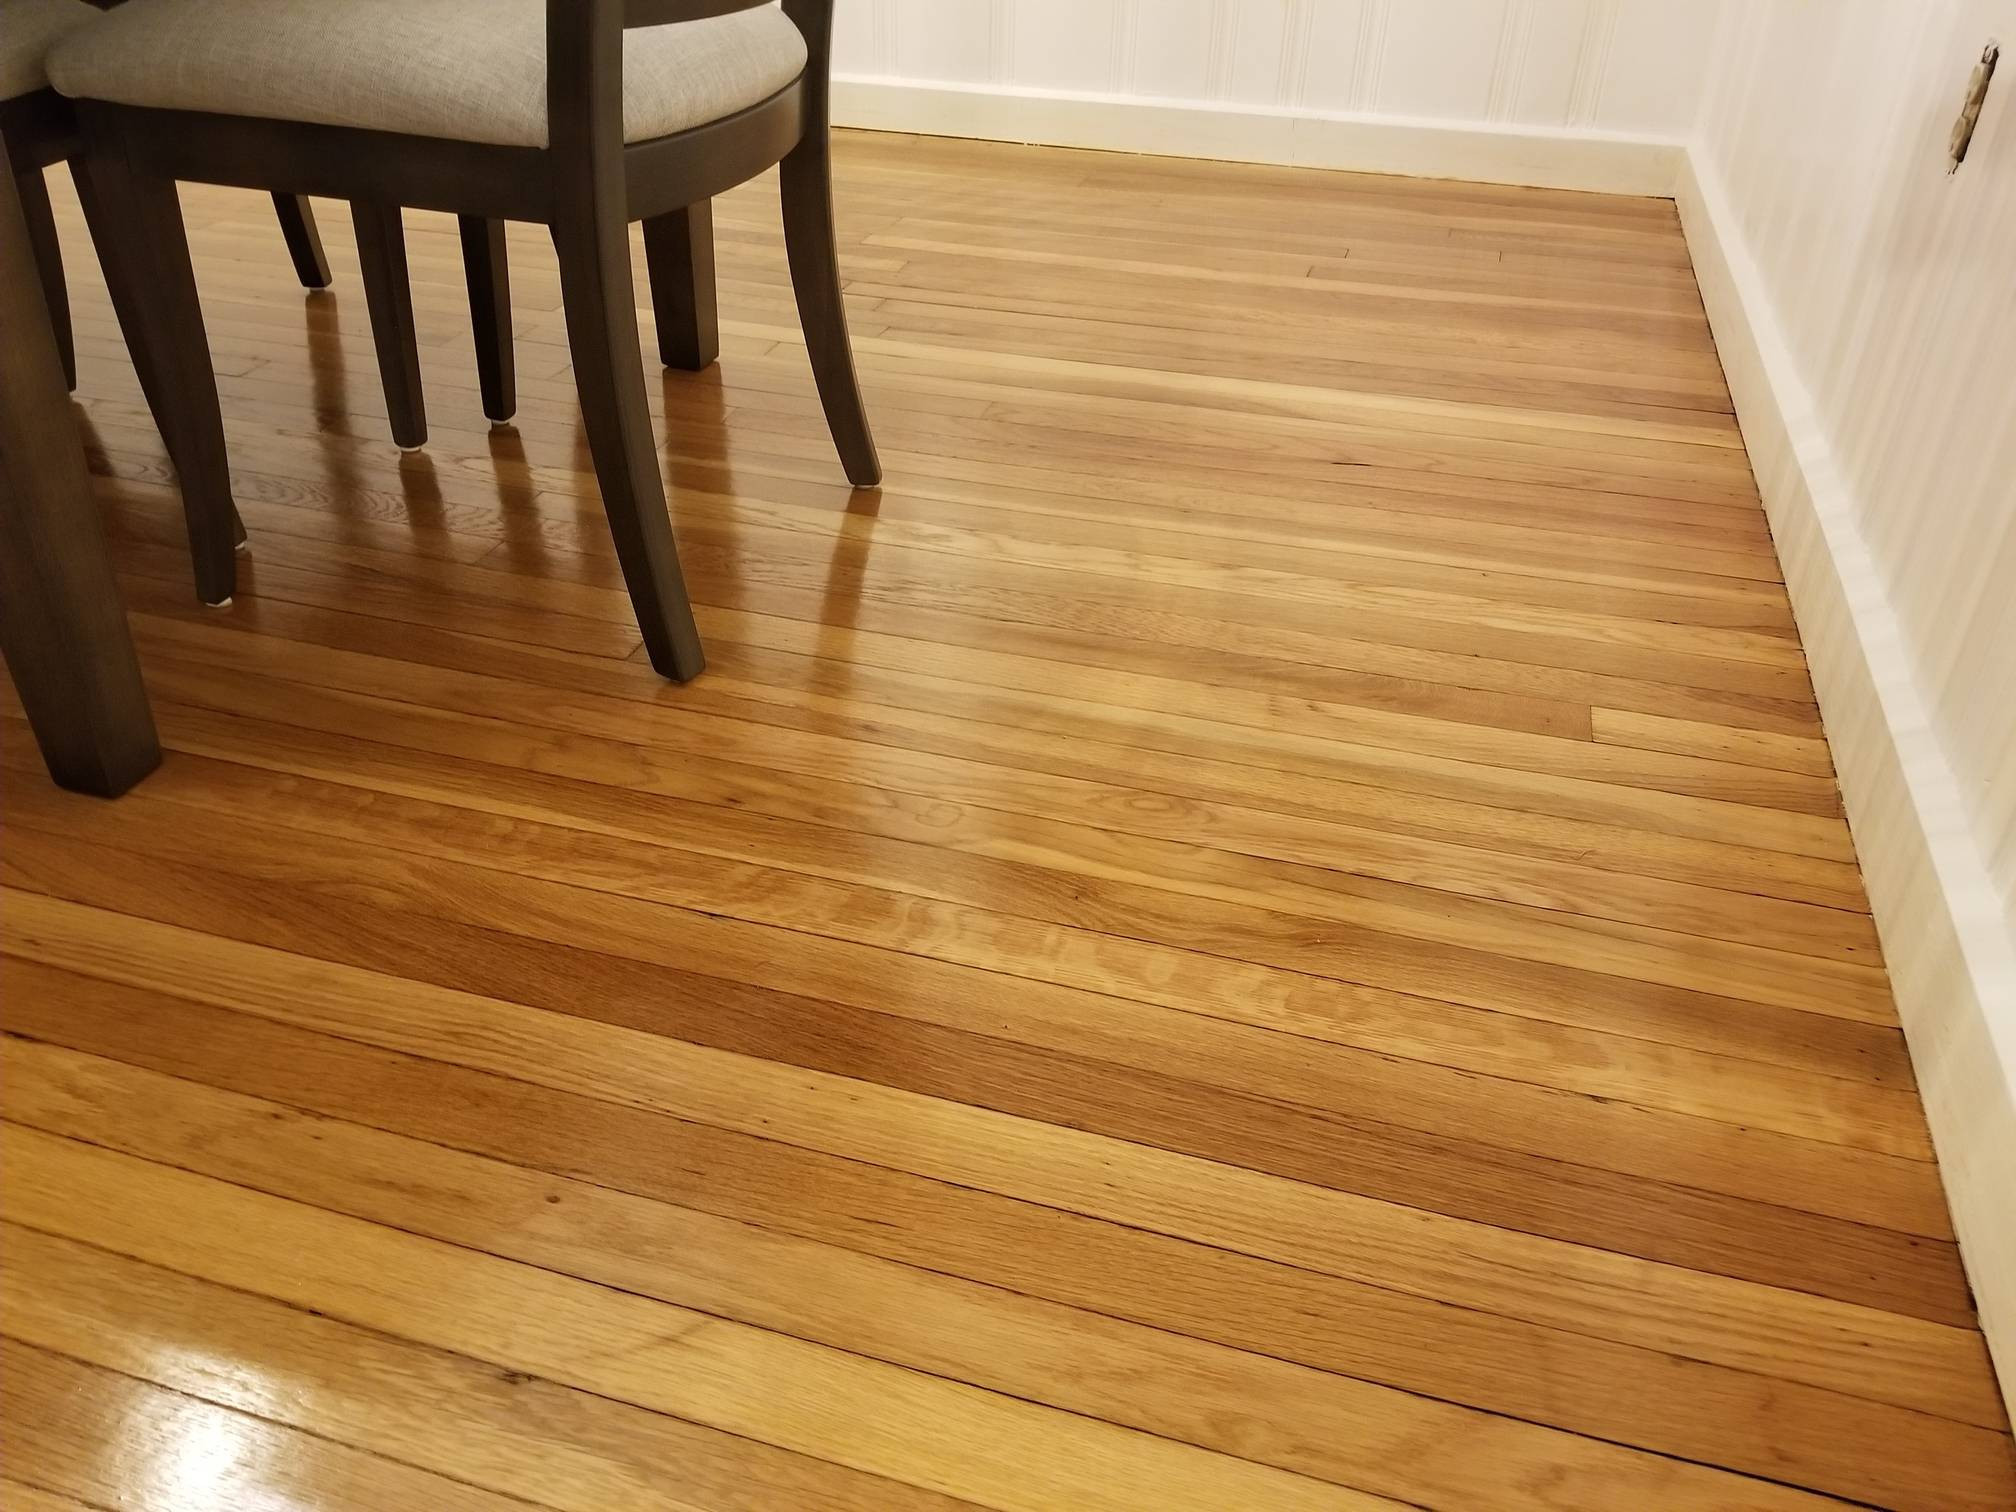 14 Great Cost to Refinish Prefinished Hardwood Floors 2024 free download cost to refinish prefinished hardwood floors of cost to refinish hardwood floors adventures in staining my red oak regarding cost to refinish hardwood floors hardwood floor cleaning stain ha